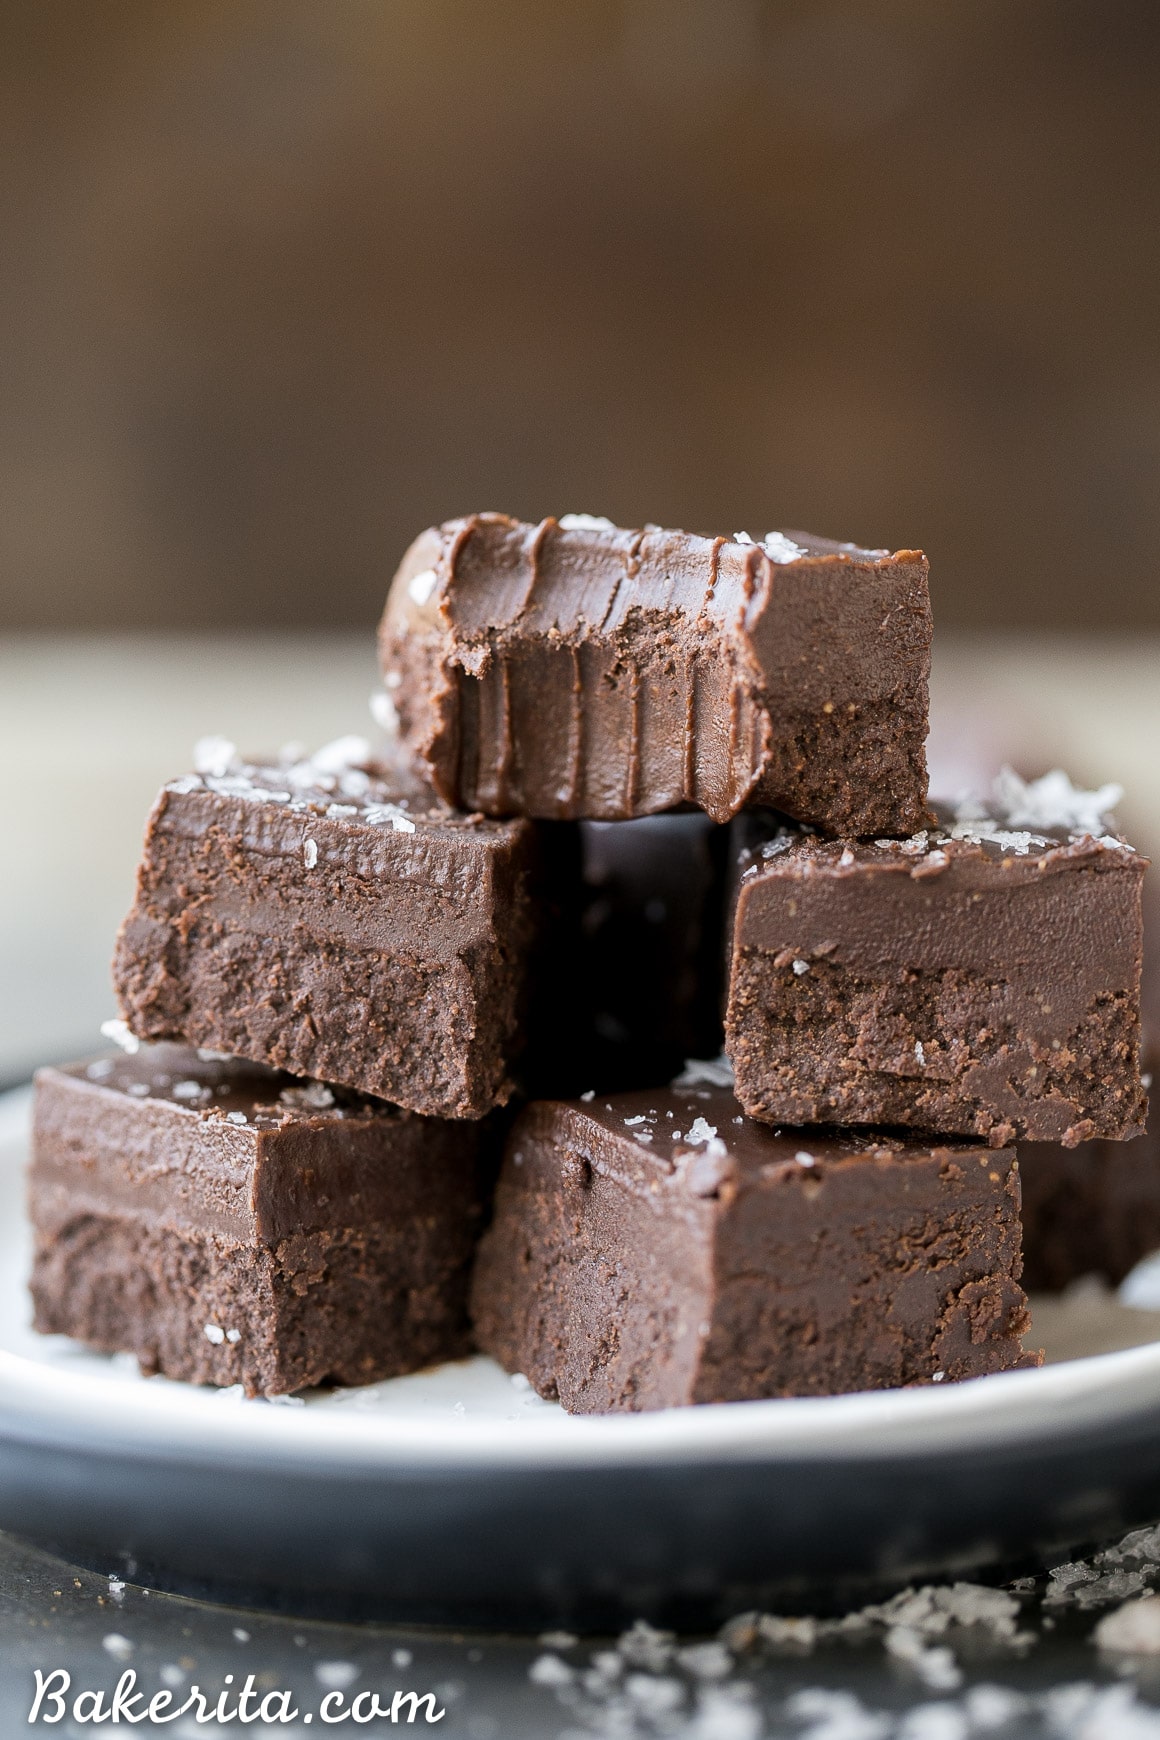 This Chocolate Fudge is incredibly smooth, rich and chocolatey. It's made with only four wholesome ingredients, there's no cooking required, and it's Paleo + vegan! It's the perfect holiday treat.